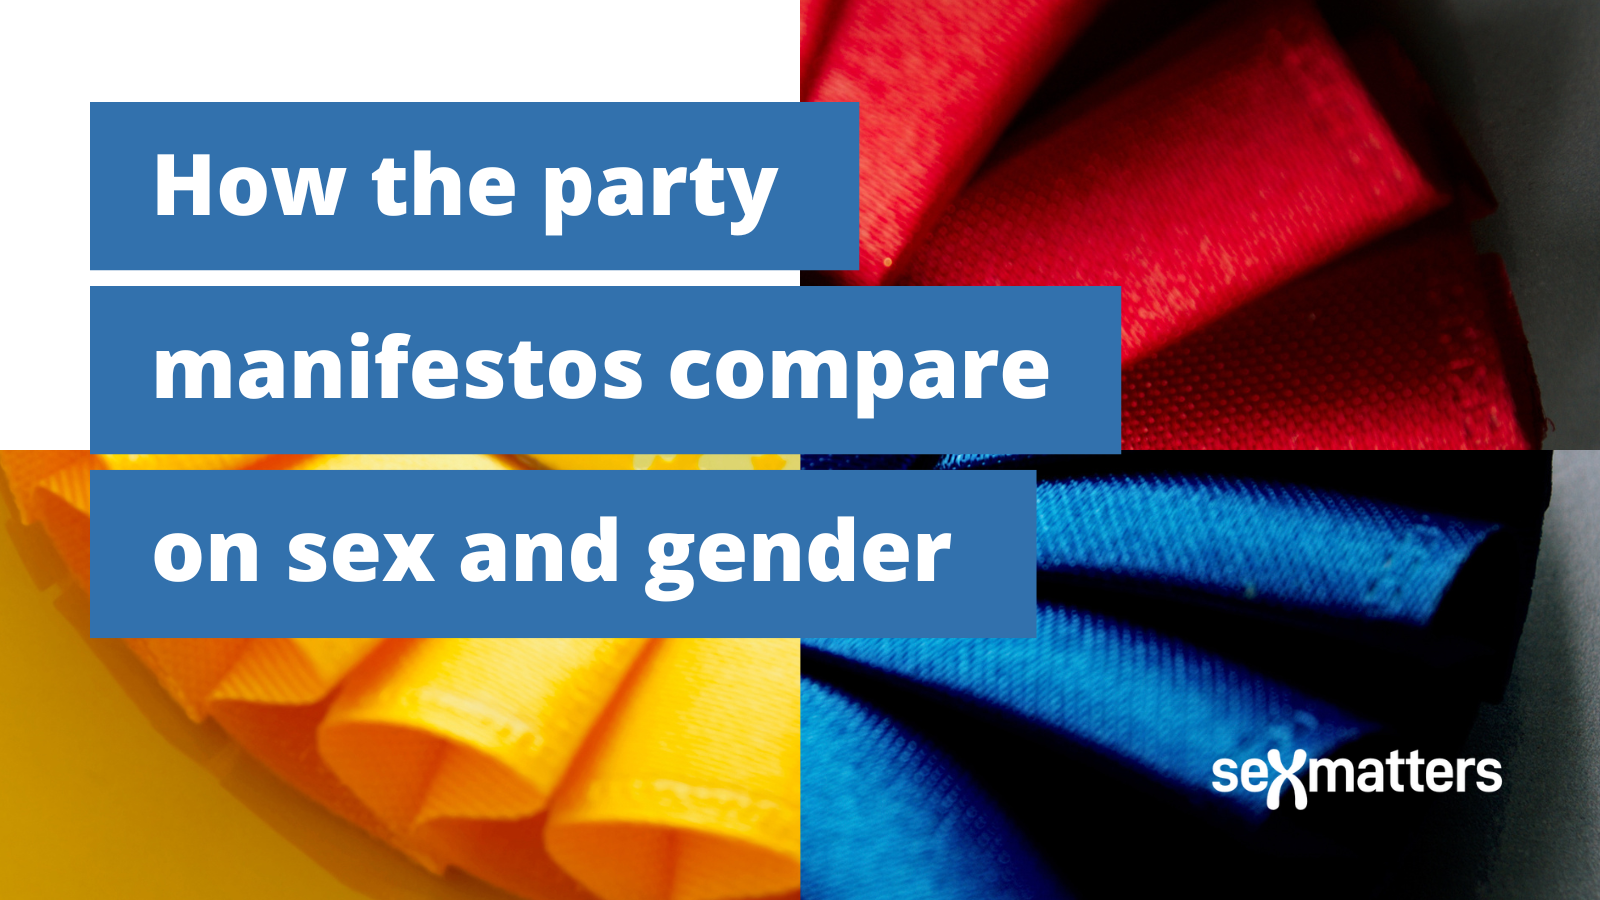 How the party manifestos compare on sex and gender